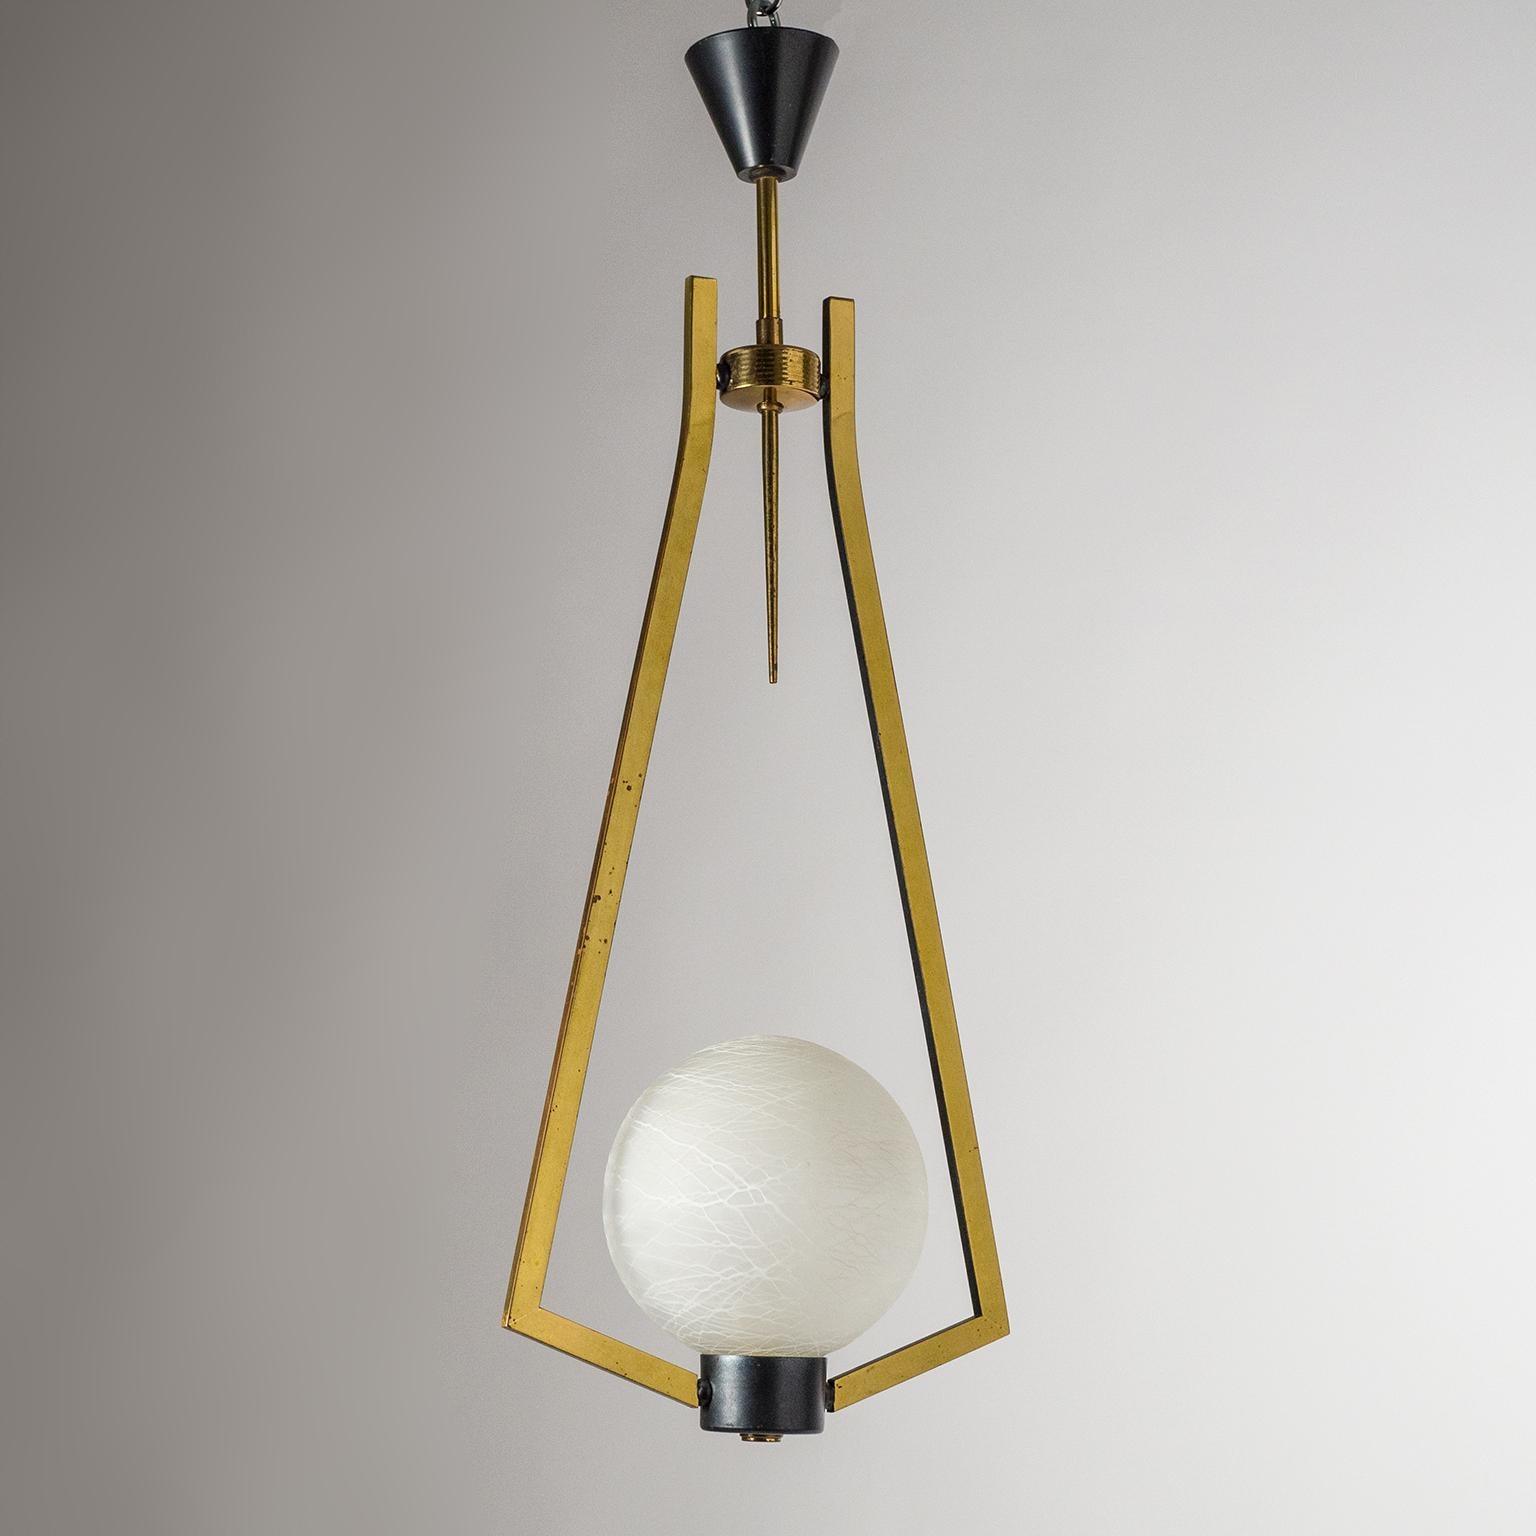 Graphical French modernist brass and glass pendant, circa 1960. Geometric polished brass hardware (partially patinated/lacquered in a dark metallic hue) with a satin glass globe which is covered with a random mesh of fine white enamel, akin to